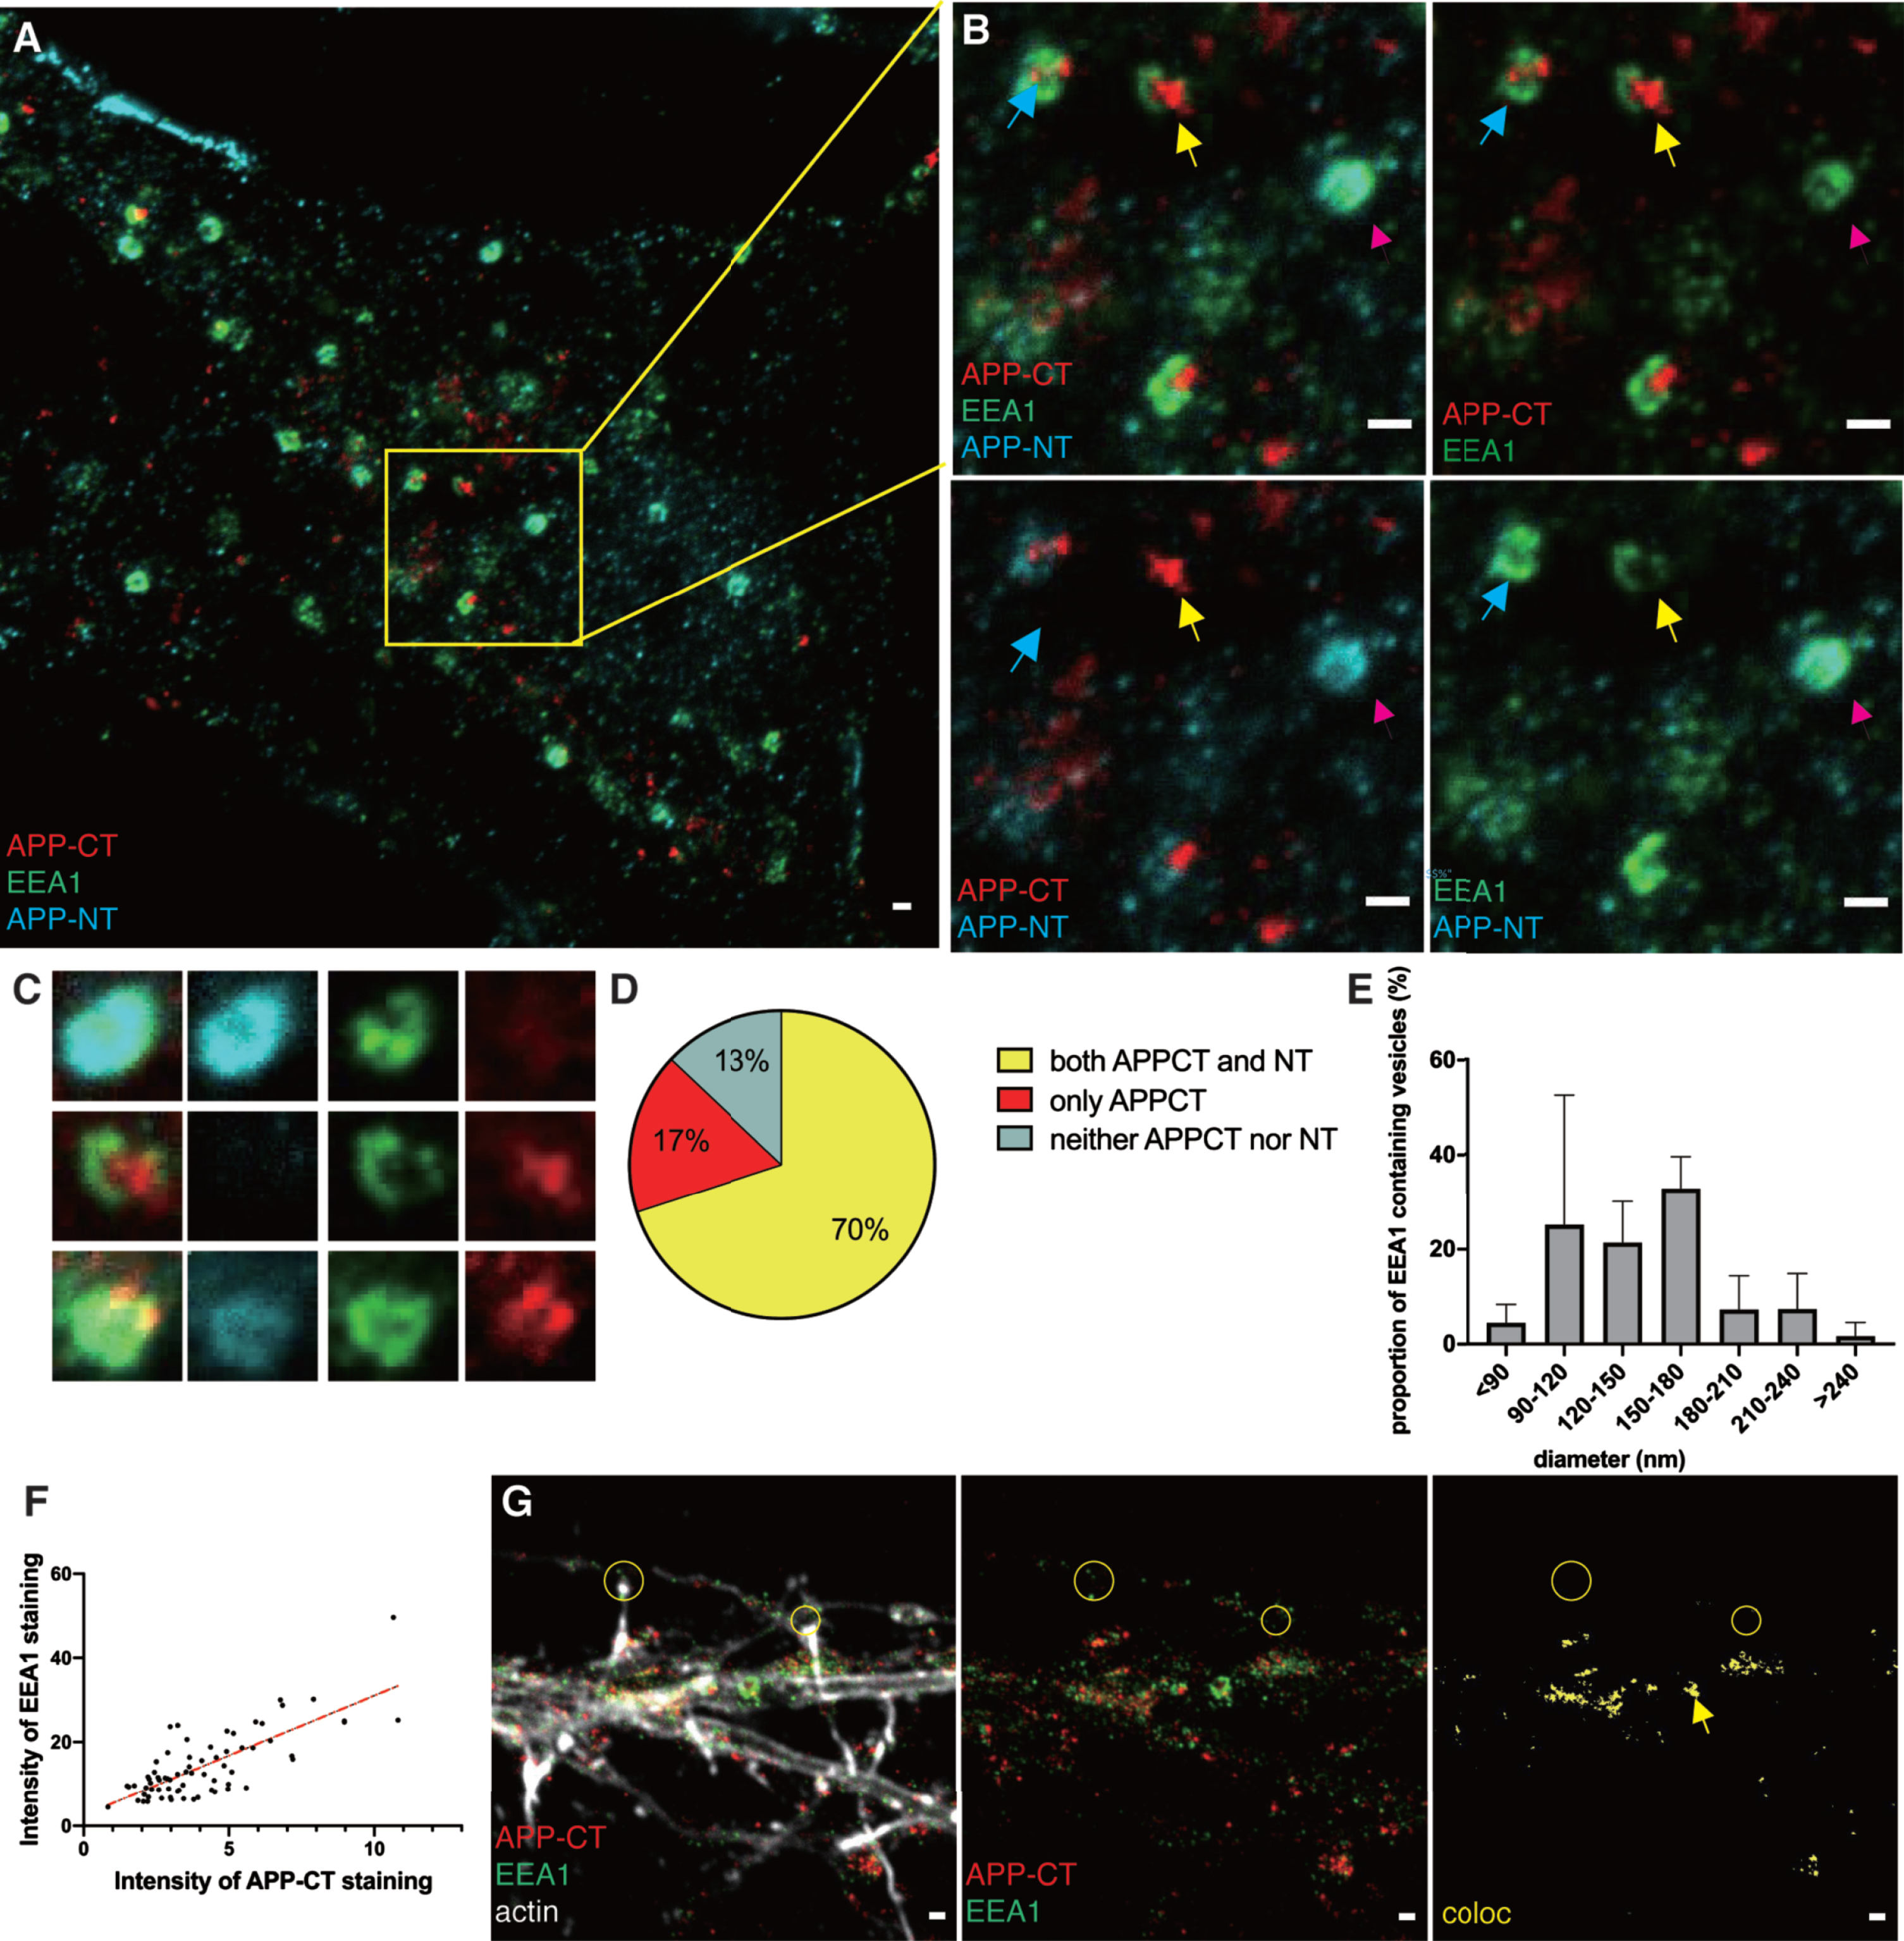 STED images of APP fragments in early endosomes. Immunolabeling and 2- or 3-channel STED microscopy was used to visualize the subcellular localization of APP-CT and/or APP-NT and the early endosome marker EEA1 in hippocampal neurons. 2-channel STED imaging was combined with a third confocal channel to image the actin cytoskeleton (phalloidin staining). Scale bar for all pictures: 500 nm. A) 3-channel STED images of APP-CT (red), APP-NT (cyan) and EEA1 (green) in soma. B) Zoomed-in field and separate channels. Yellow arrows point at vesicles containing APP-CT but not APP-NT. Magenta arrows point at vesicles containing APP-NT but not APP-CT. Blue arrows point at vesicles containing both APP-CT and APP-NT. C) 3-channel STED images of zoomed-in early endosomes visualizing EEA1 (green), APP-CT (red) and APP-NT (cyan) showed in merged and separate channels. D) Quantification of APP-CT and/or APP-NT in EEA1-positive early endosomes (n = 70). E) Quantification of the size (diameter) of EEA1-positive vesicles. Data were quantified from 5 different batches of hippocampal neurons. All error bars represent mean±sd. F) Quantification of the intensity of EEA1 and APP-CT staining in soma (n = 70). G) 2-channel STED images of APP-CT (red) and EEA1 (green) in neurites overlayed with actin shown in a confocal channel. Images show, from left to right, all channels, APP-CT and EEA1, colocalization of APP-CT and EEA1. Lack of colocalization in two synaptic regions are marked by yellow circles. The yellow arrow points out the large EEA1-containing vesicle.